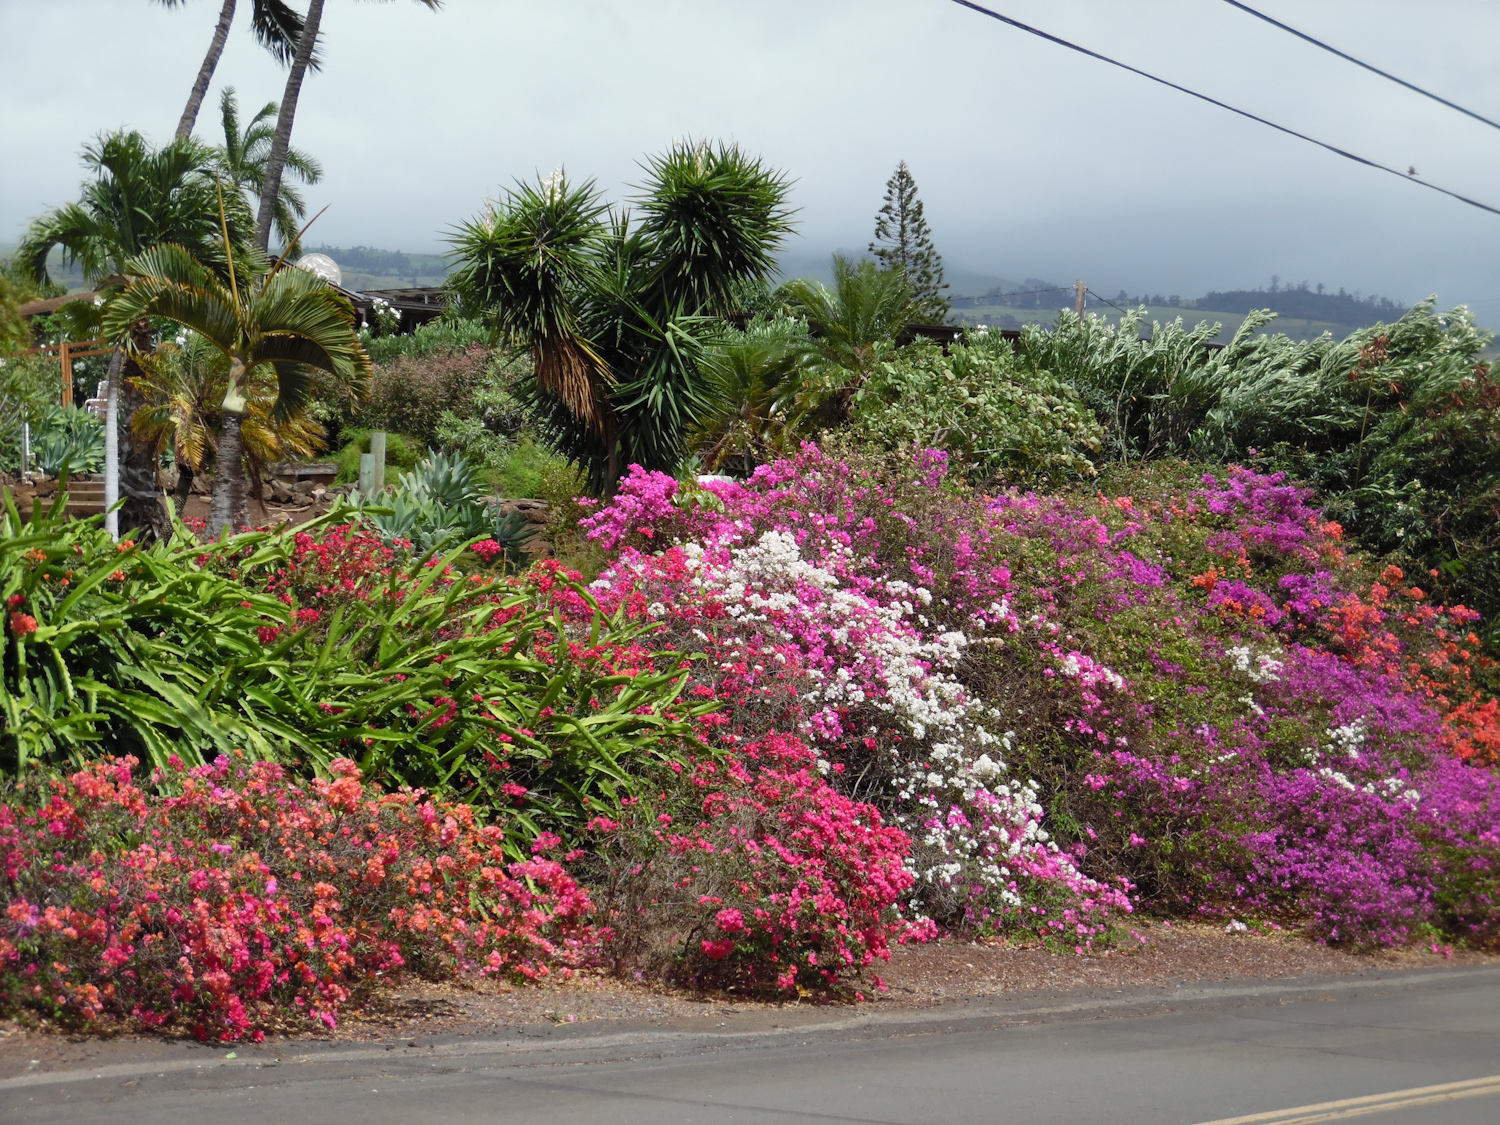 Flowers across street from VB home on Keahi Place